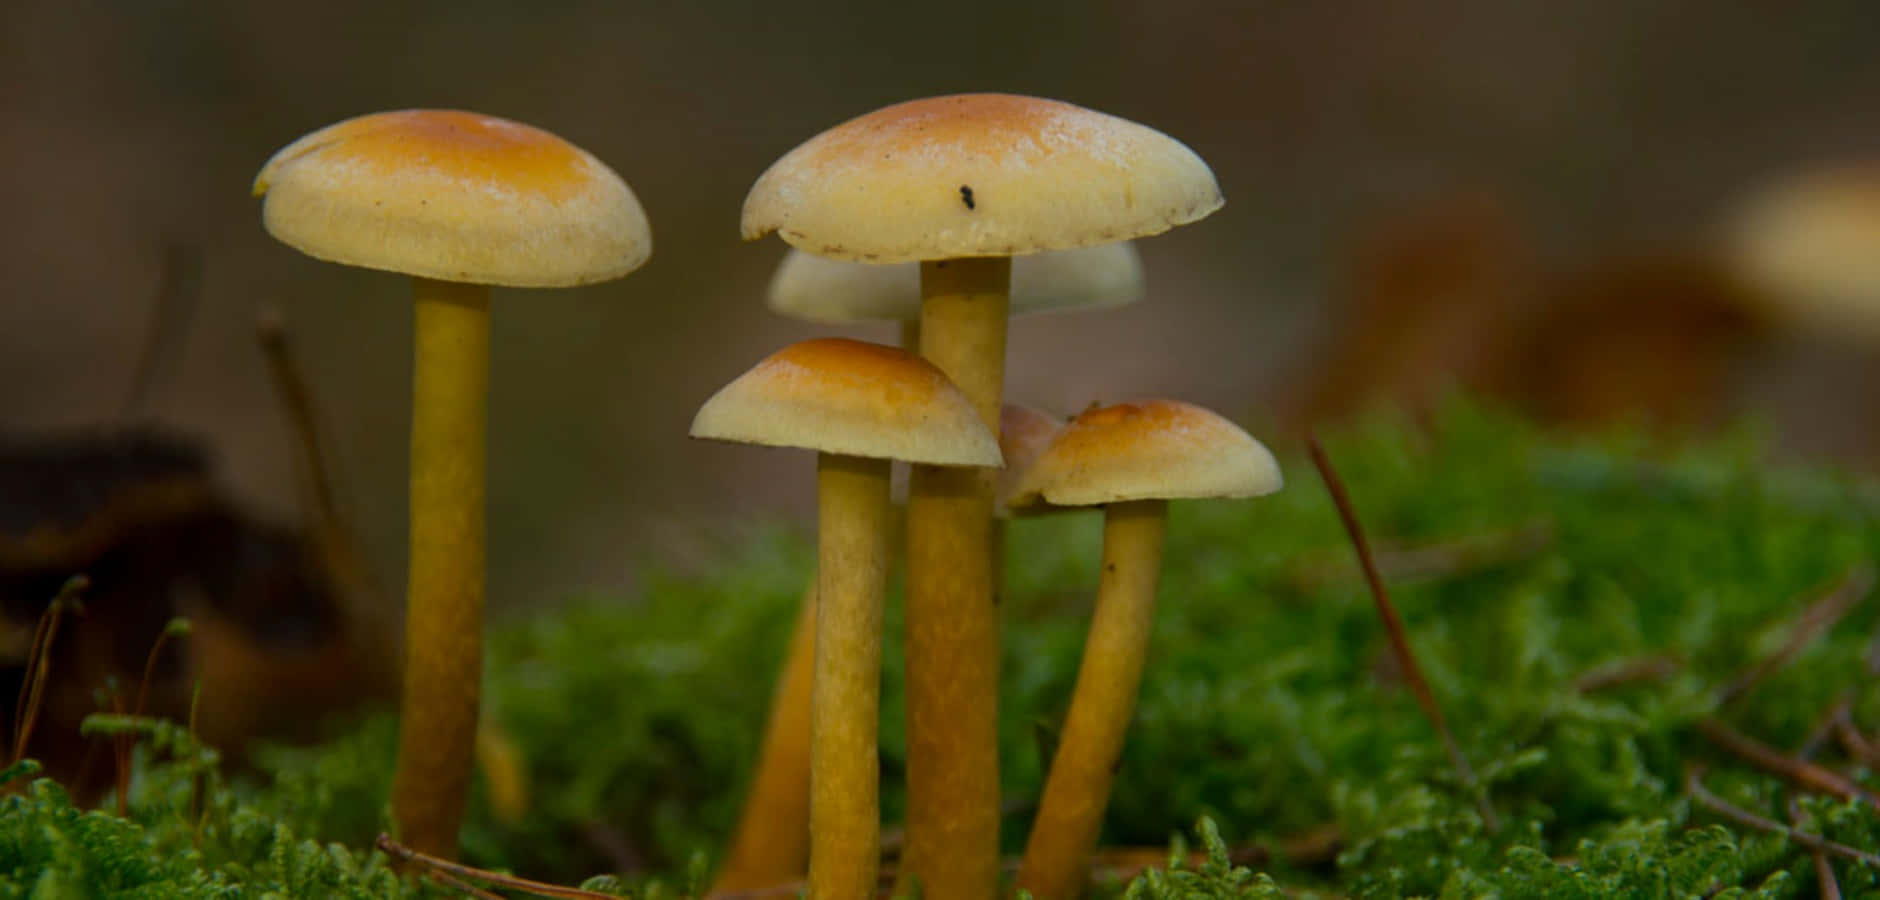 Magical, Psychedelic Mushrooms